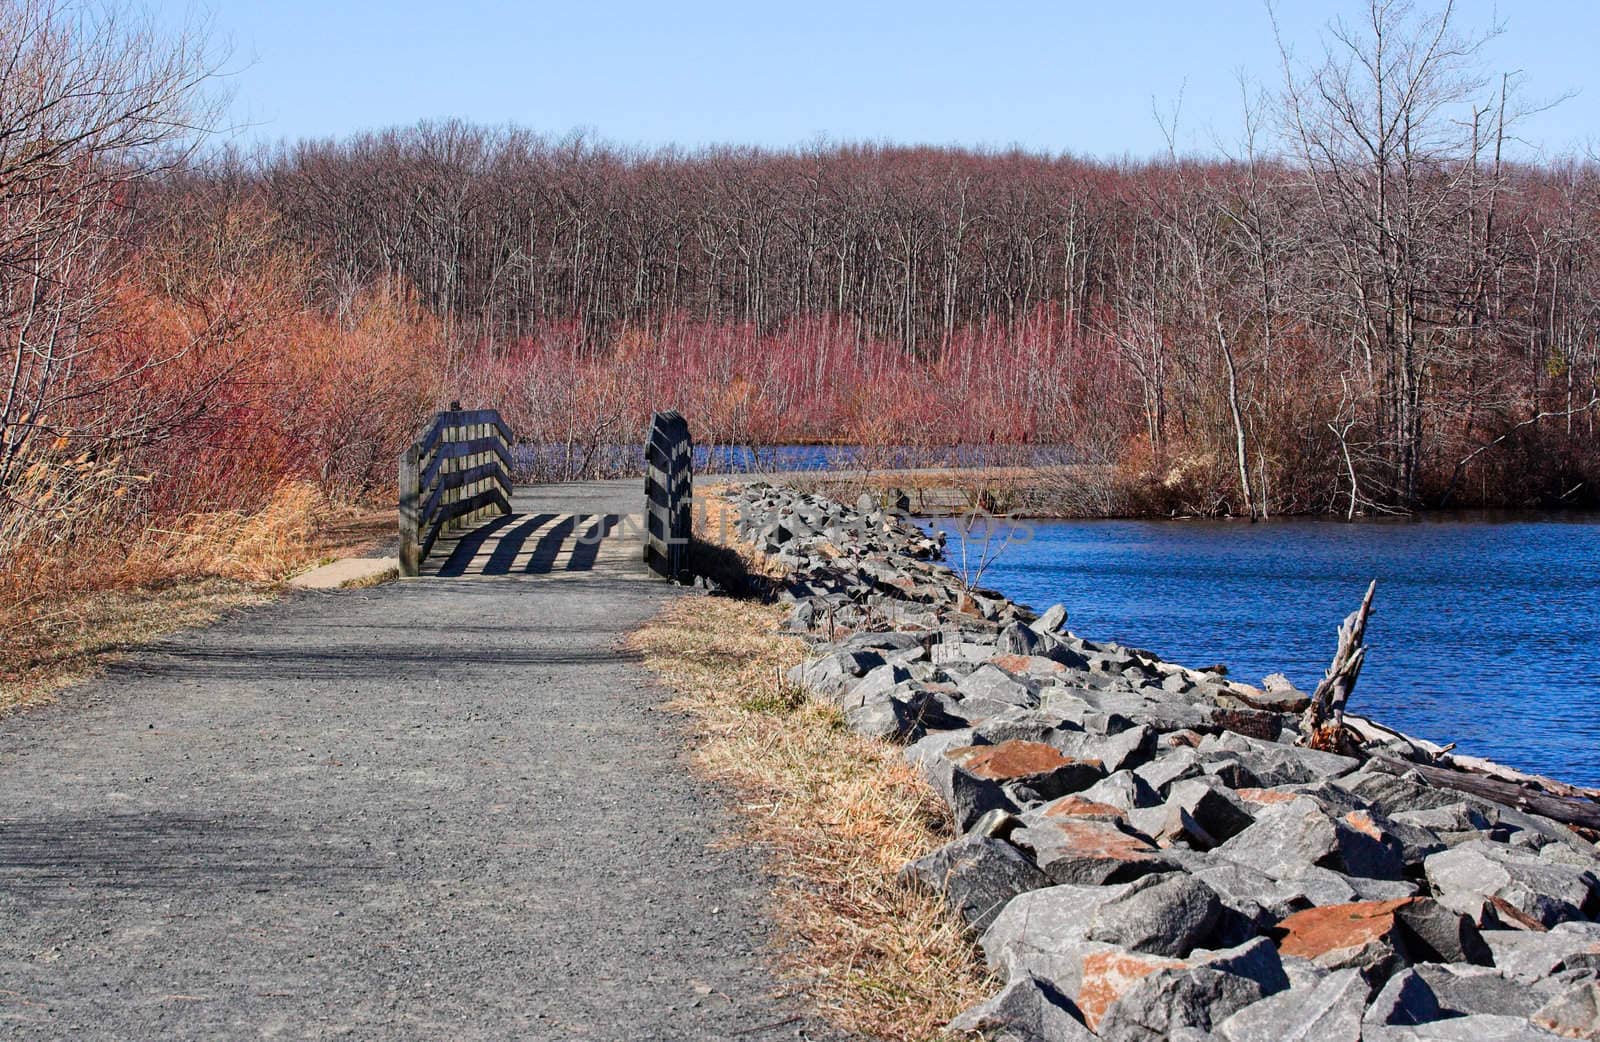 A path around Manasquan Reservoir in New Jersey during a nice winter day.